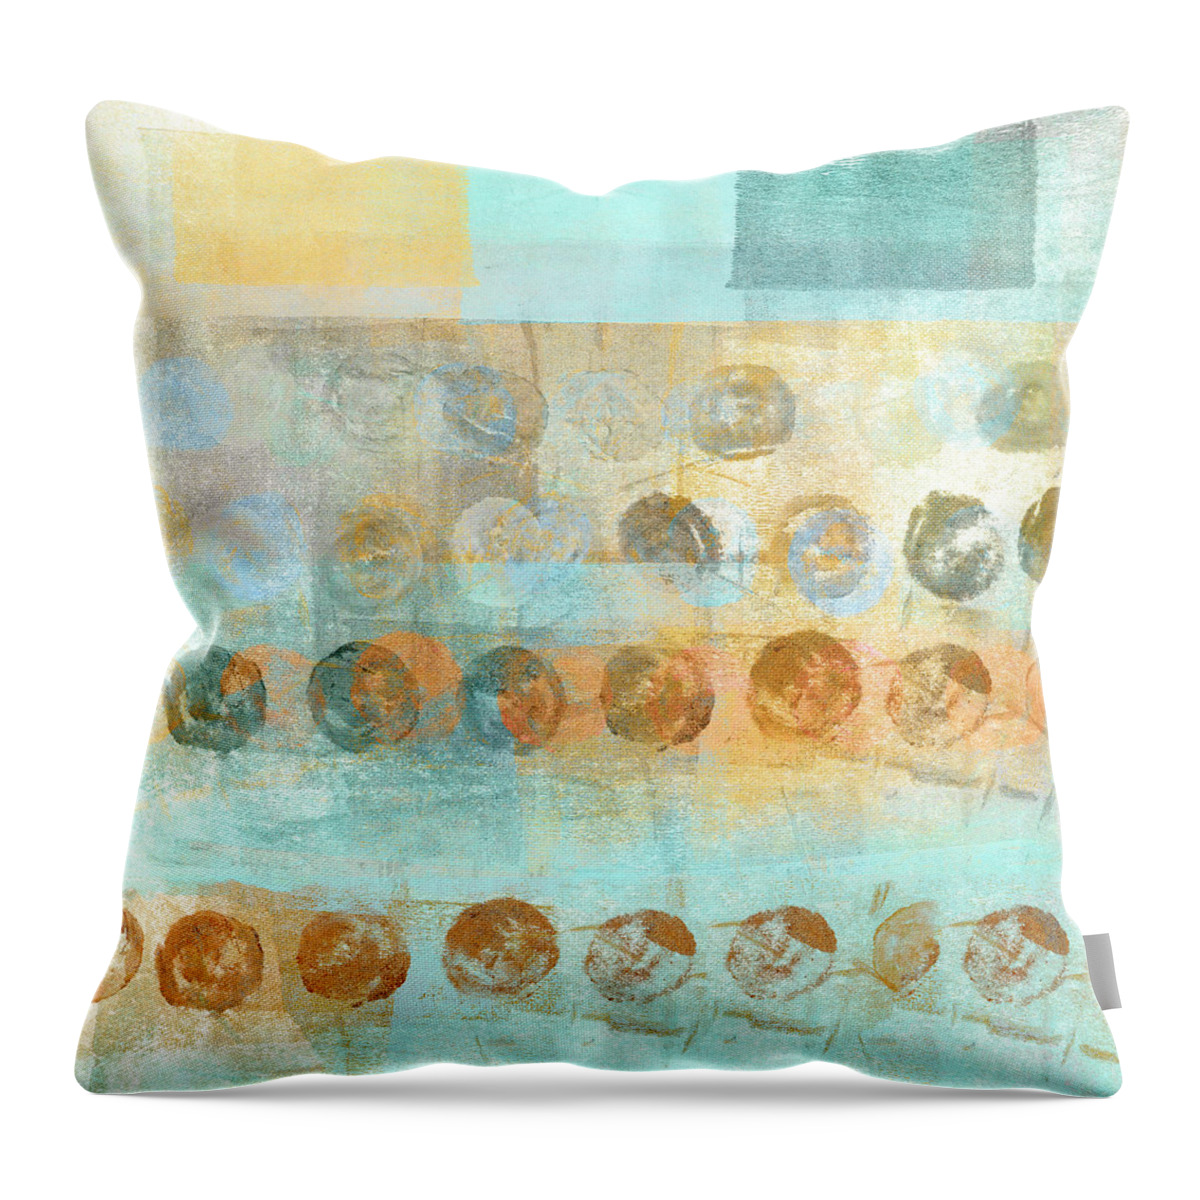 Marbles Throw Pillow featuring the mixed media Marbles Found Number 3 by Carol Leigh